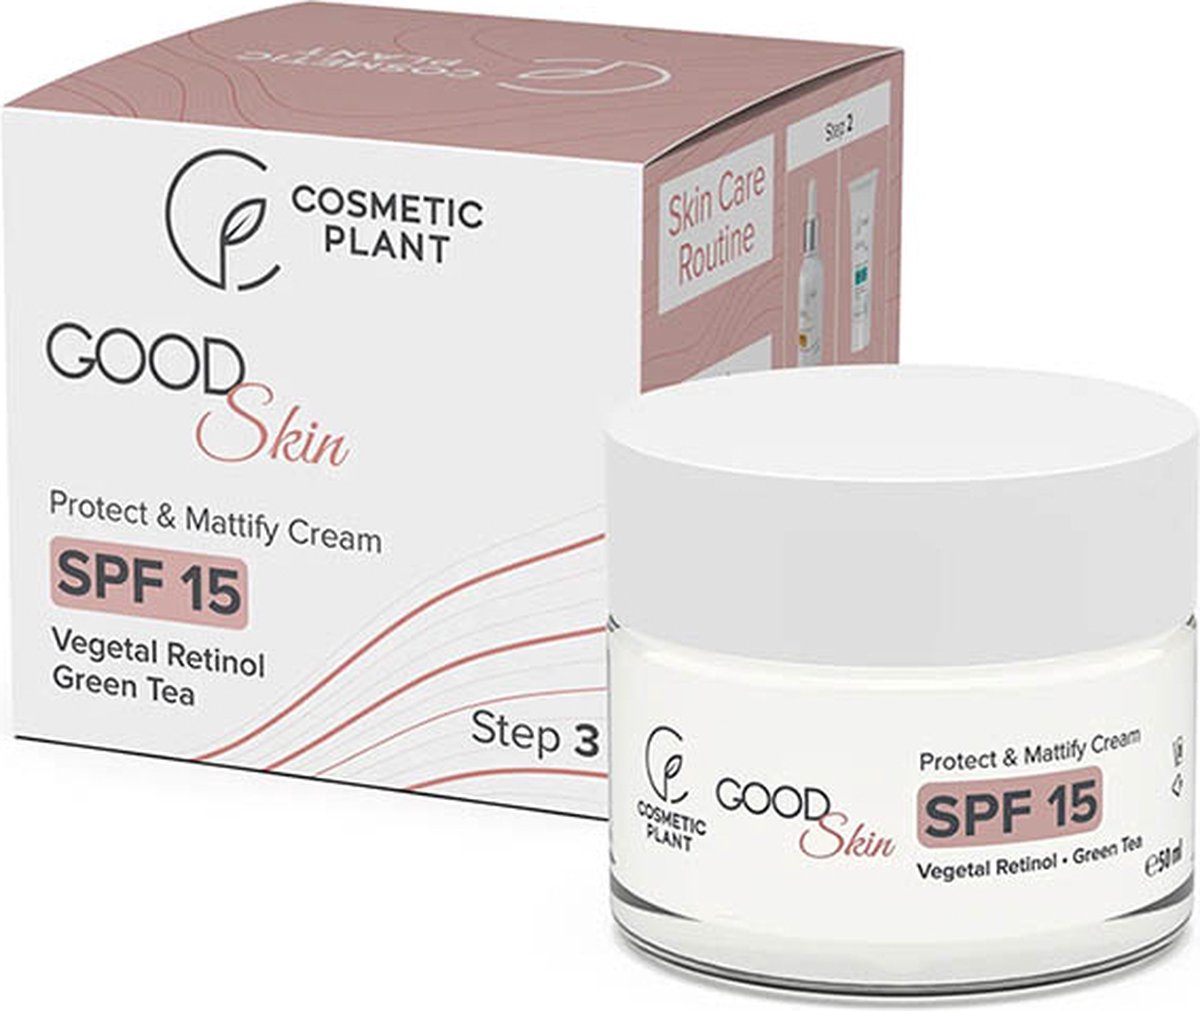 Cosmetic Plant - Good Skin - Protect and Mattify Cream SPF15 with Vegetal Retinol and Green Tea for Mixed/Oily Skin